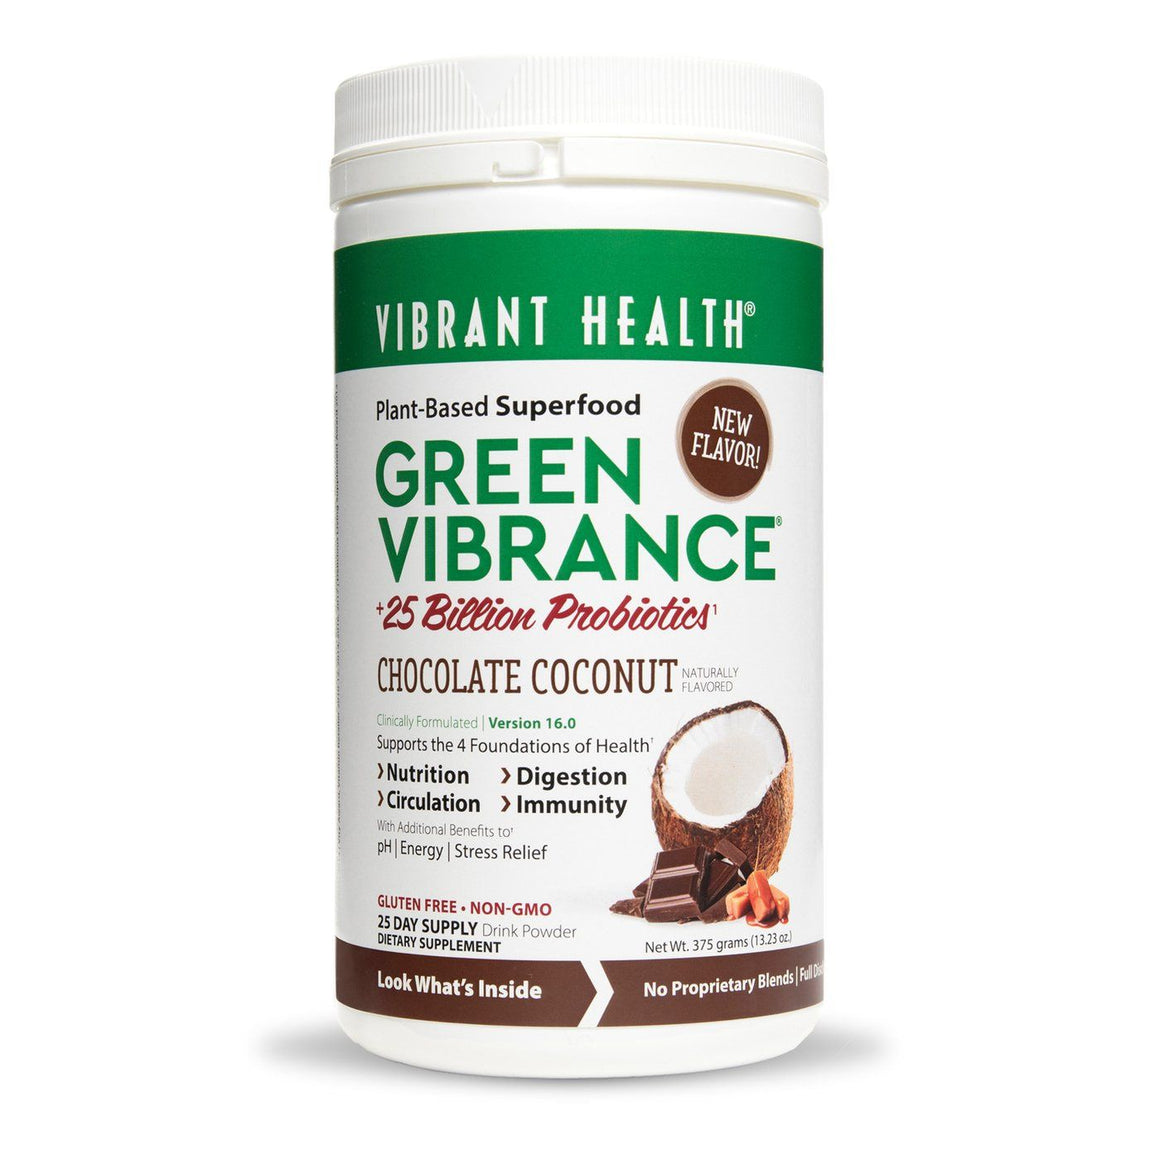 A bottle of Vibrant Health Green Vibrance Chocolate Coconut